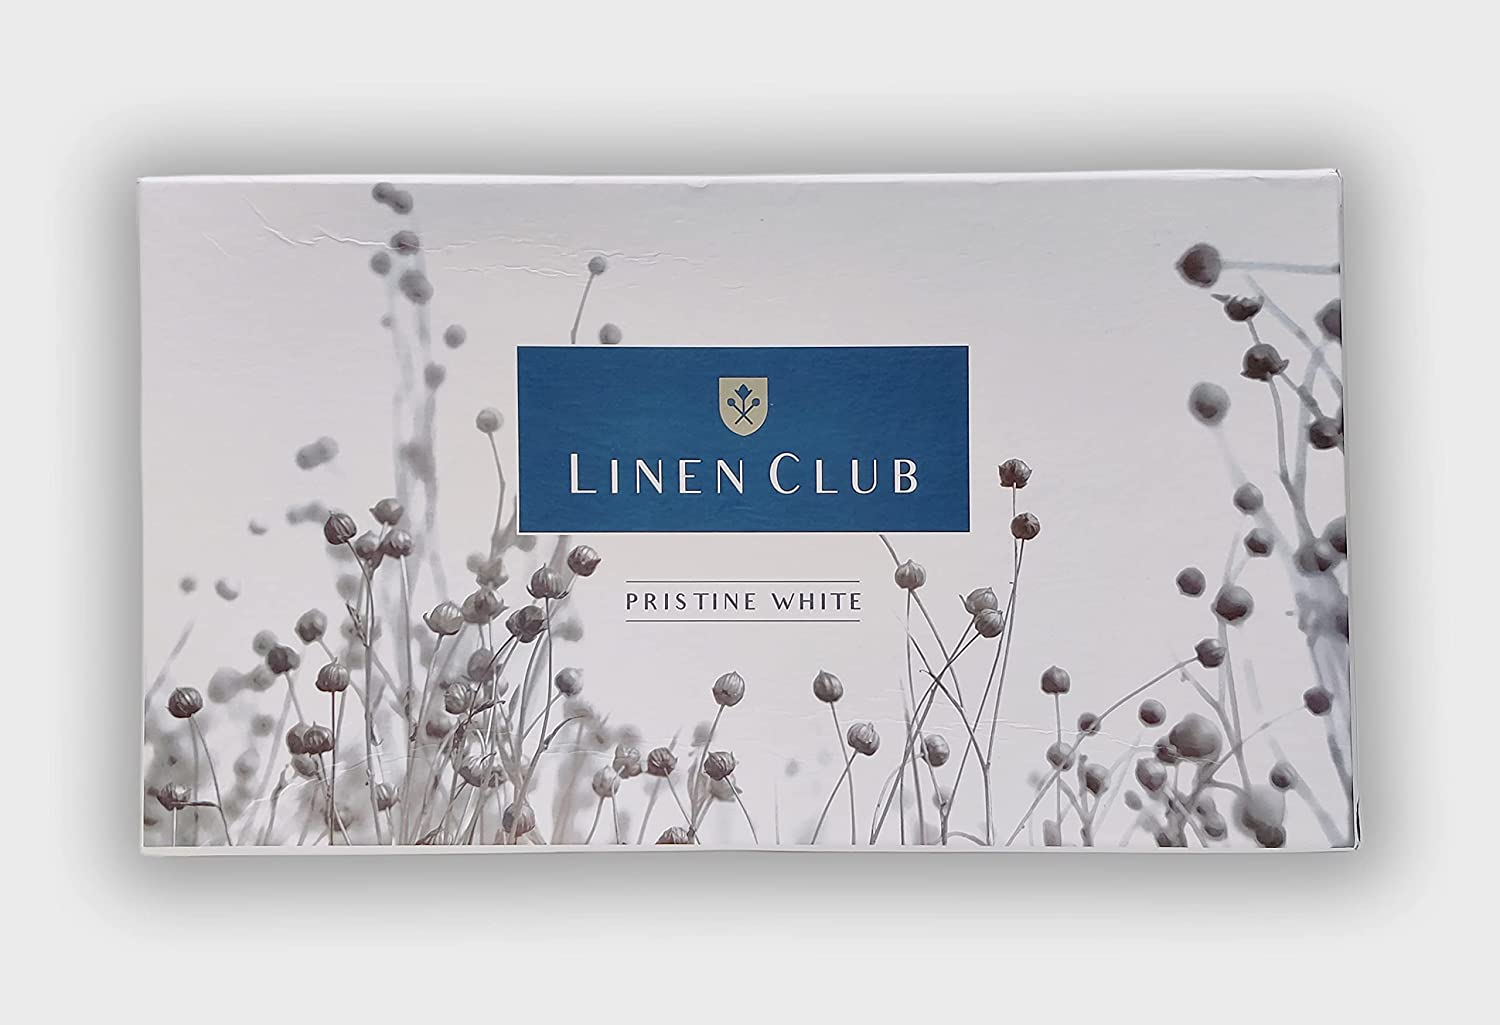 Linen Club launches #LetGoForNew ad campaign on Sankranti - Brand Wagon  News | The Financial Express